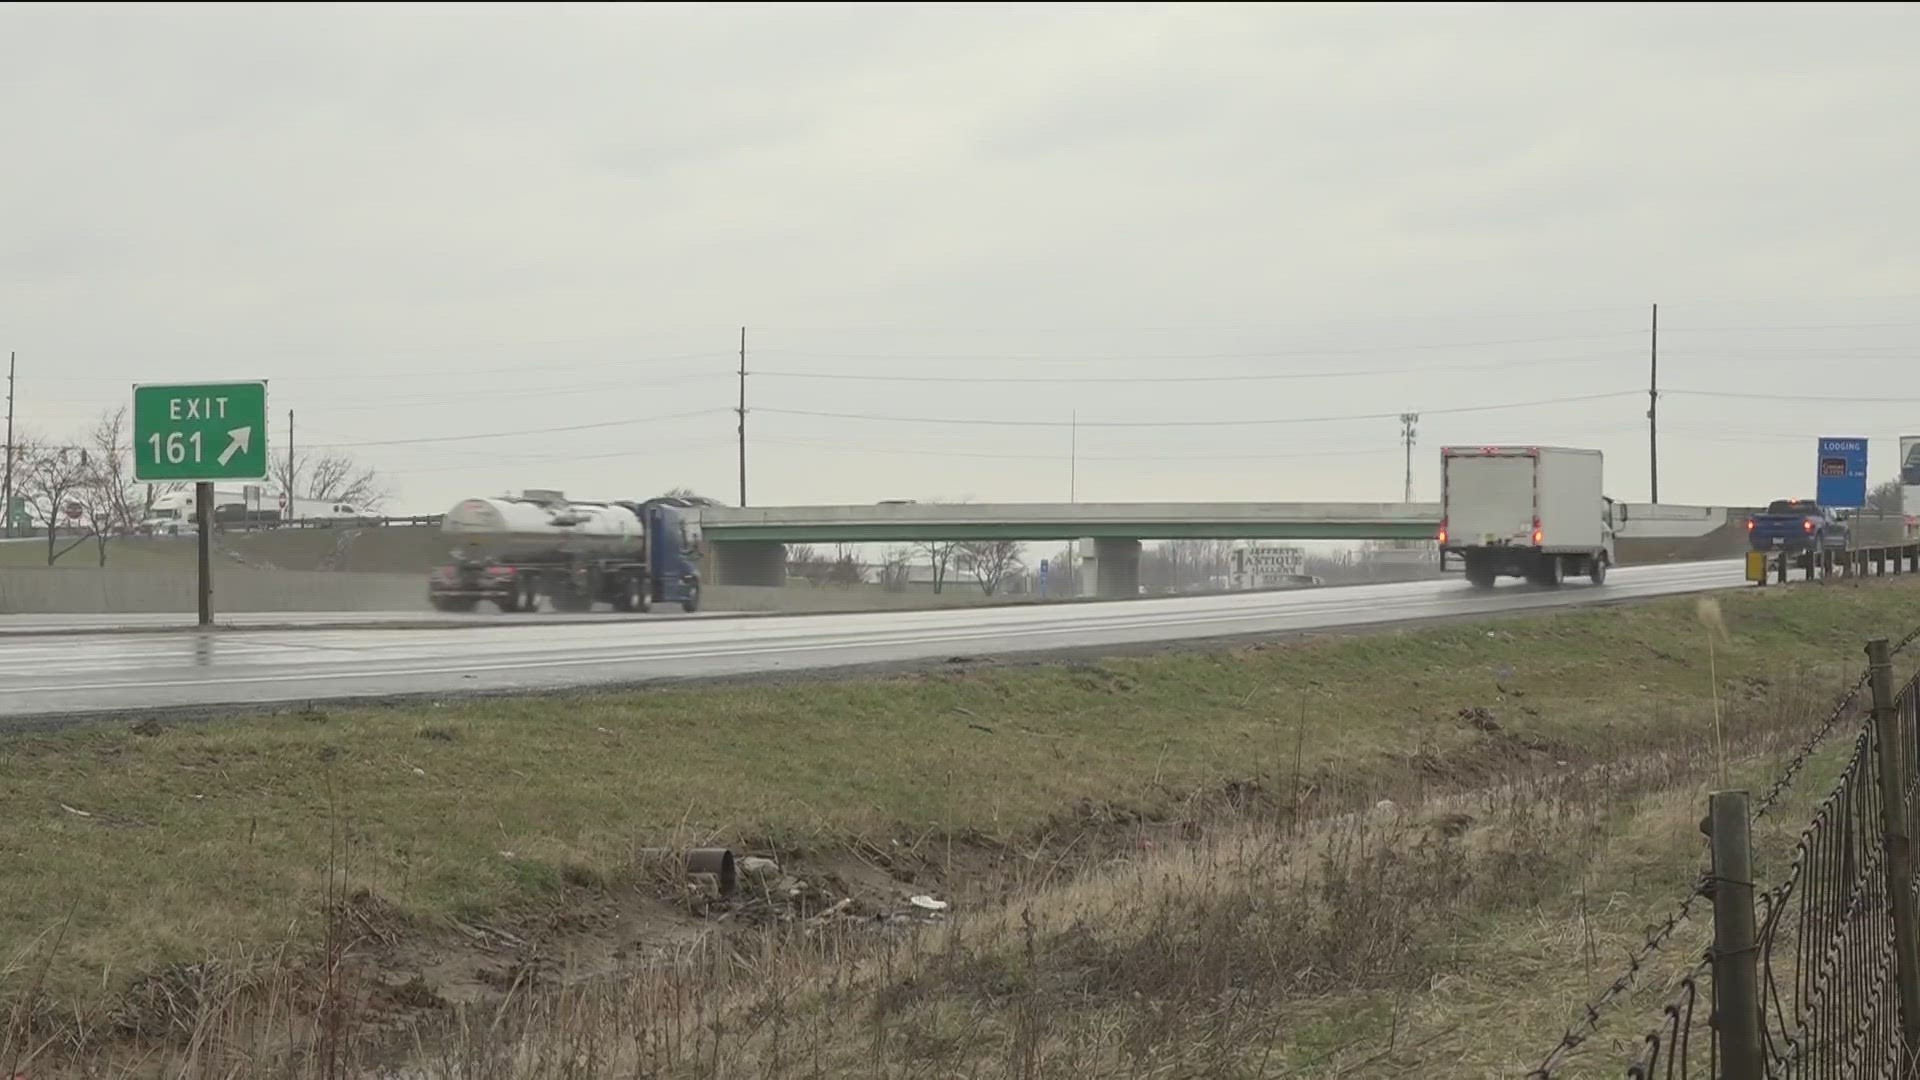 Local leaders say with recent and future developments adding to traffic, the new configuration will alleviate congestion and make travel safer.